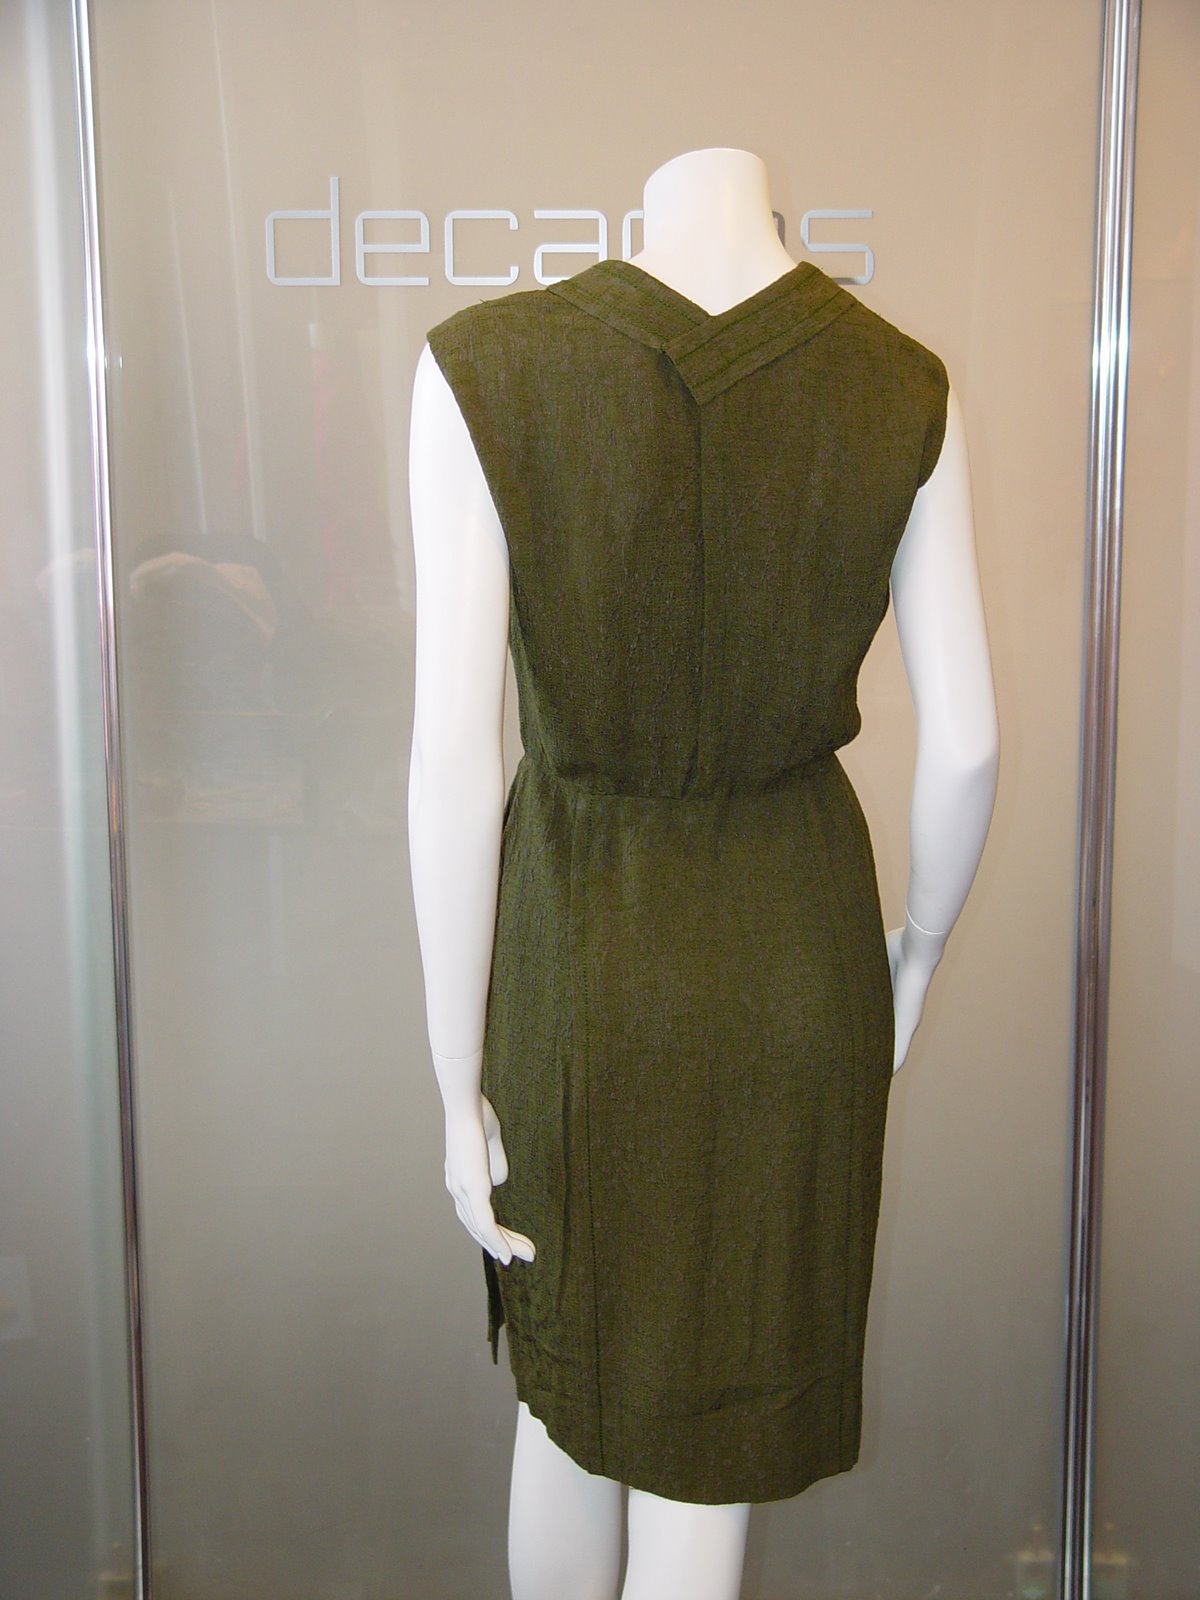 [CHANEL+HAUTE+COUTURE+OLIVE+TEXTURED+NAUTICAL+STYLE+DRESS+SIZE+4+C+60S.JPG.JPG]